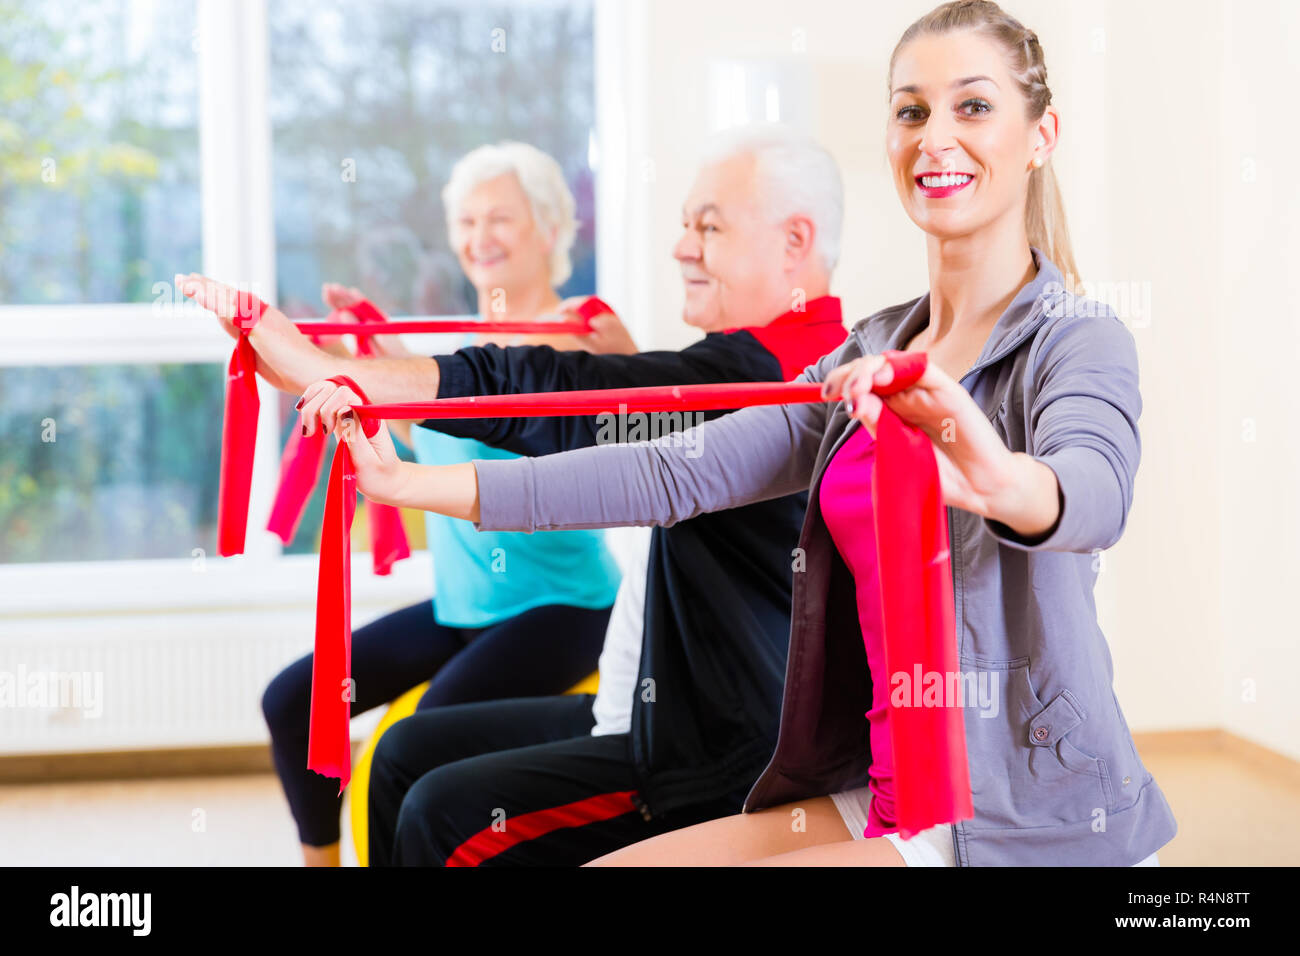 People at gym exercise with stretch band Stock Photo